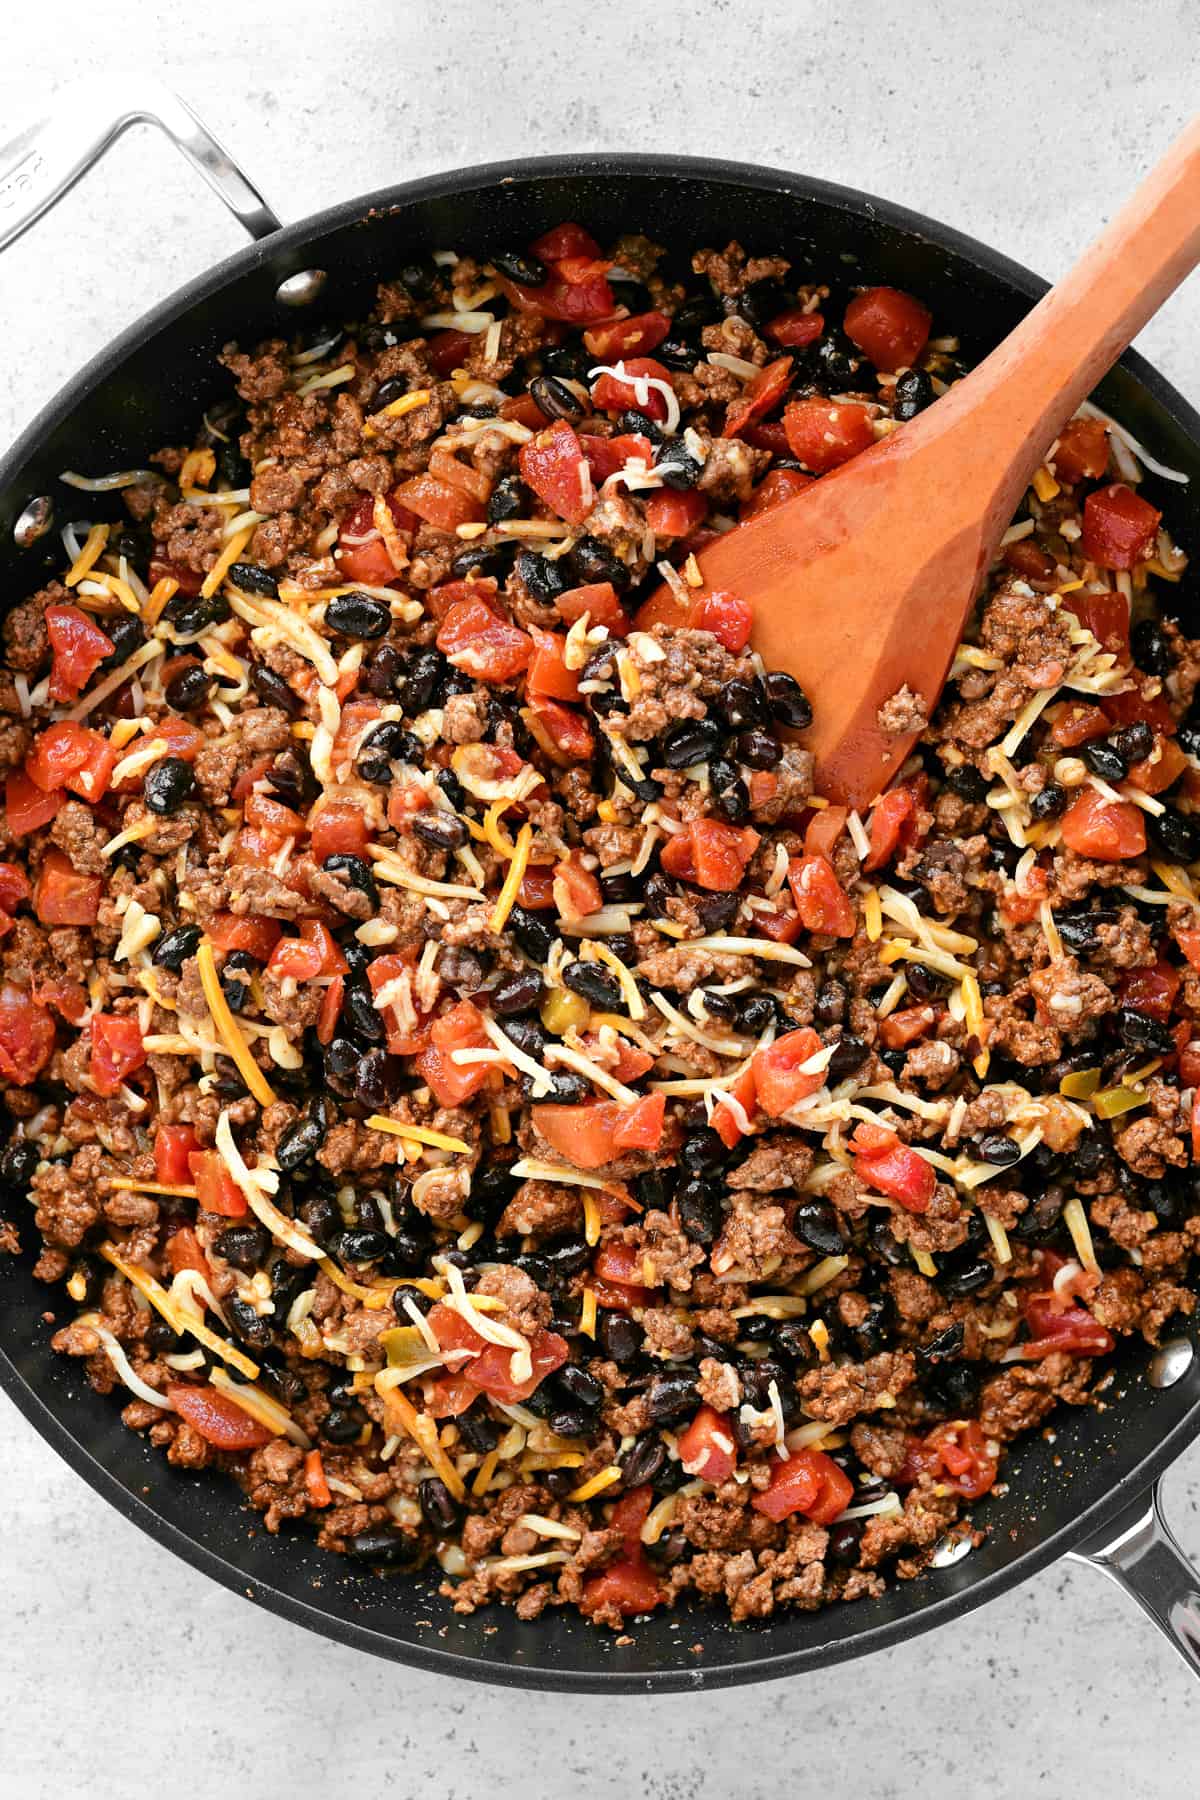 meat, tomatoes, beans, and cheese in a skillet with a wooden spoon.